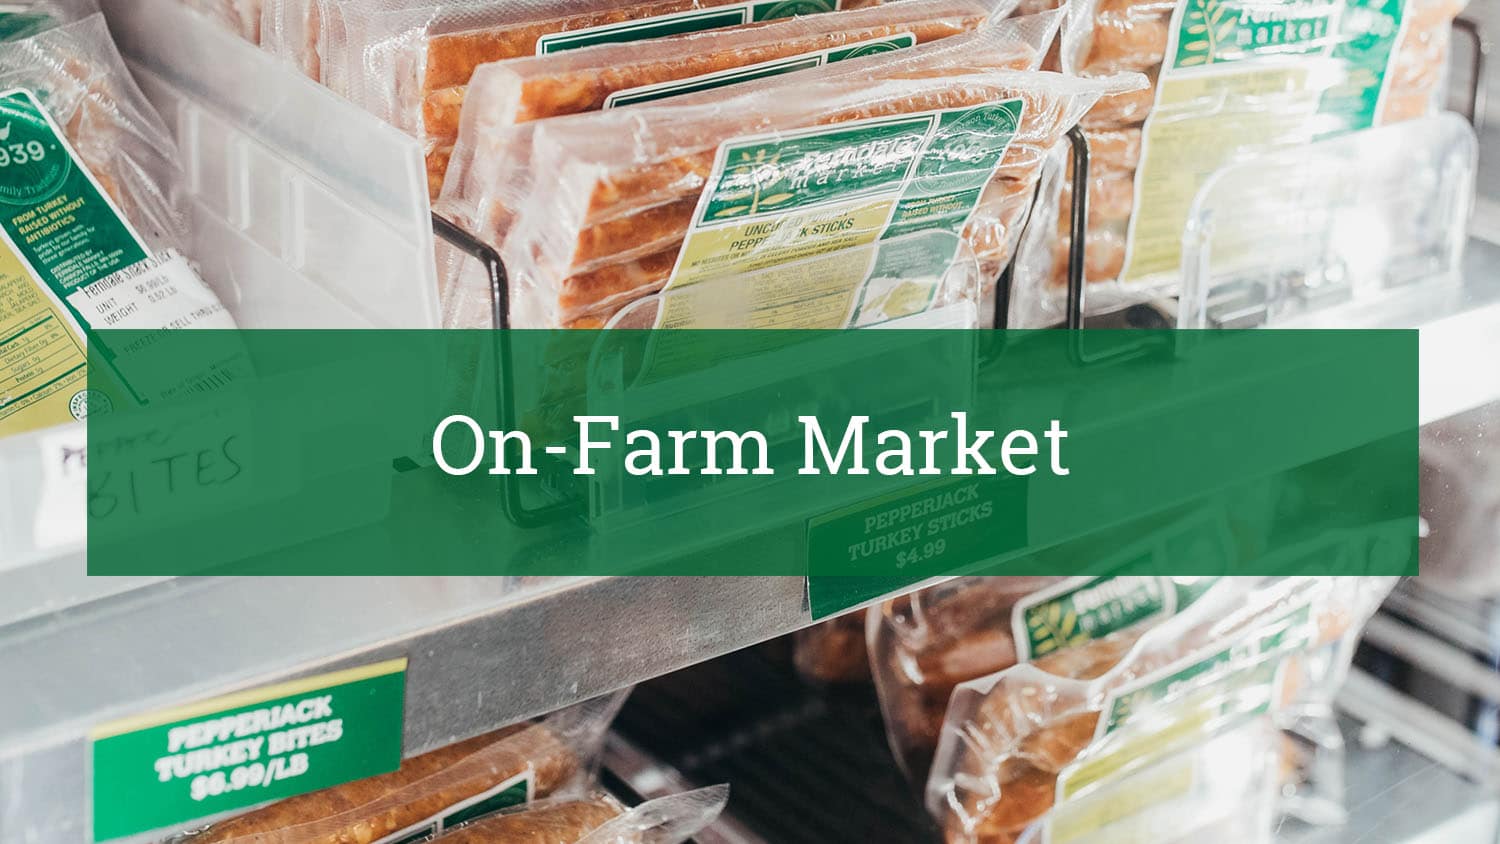 Shop at our On-Farm Market in Cannon Falls, MN